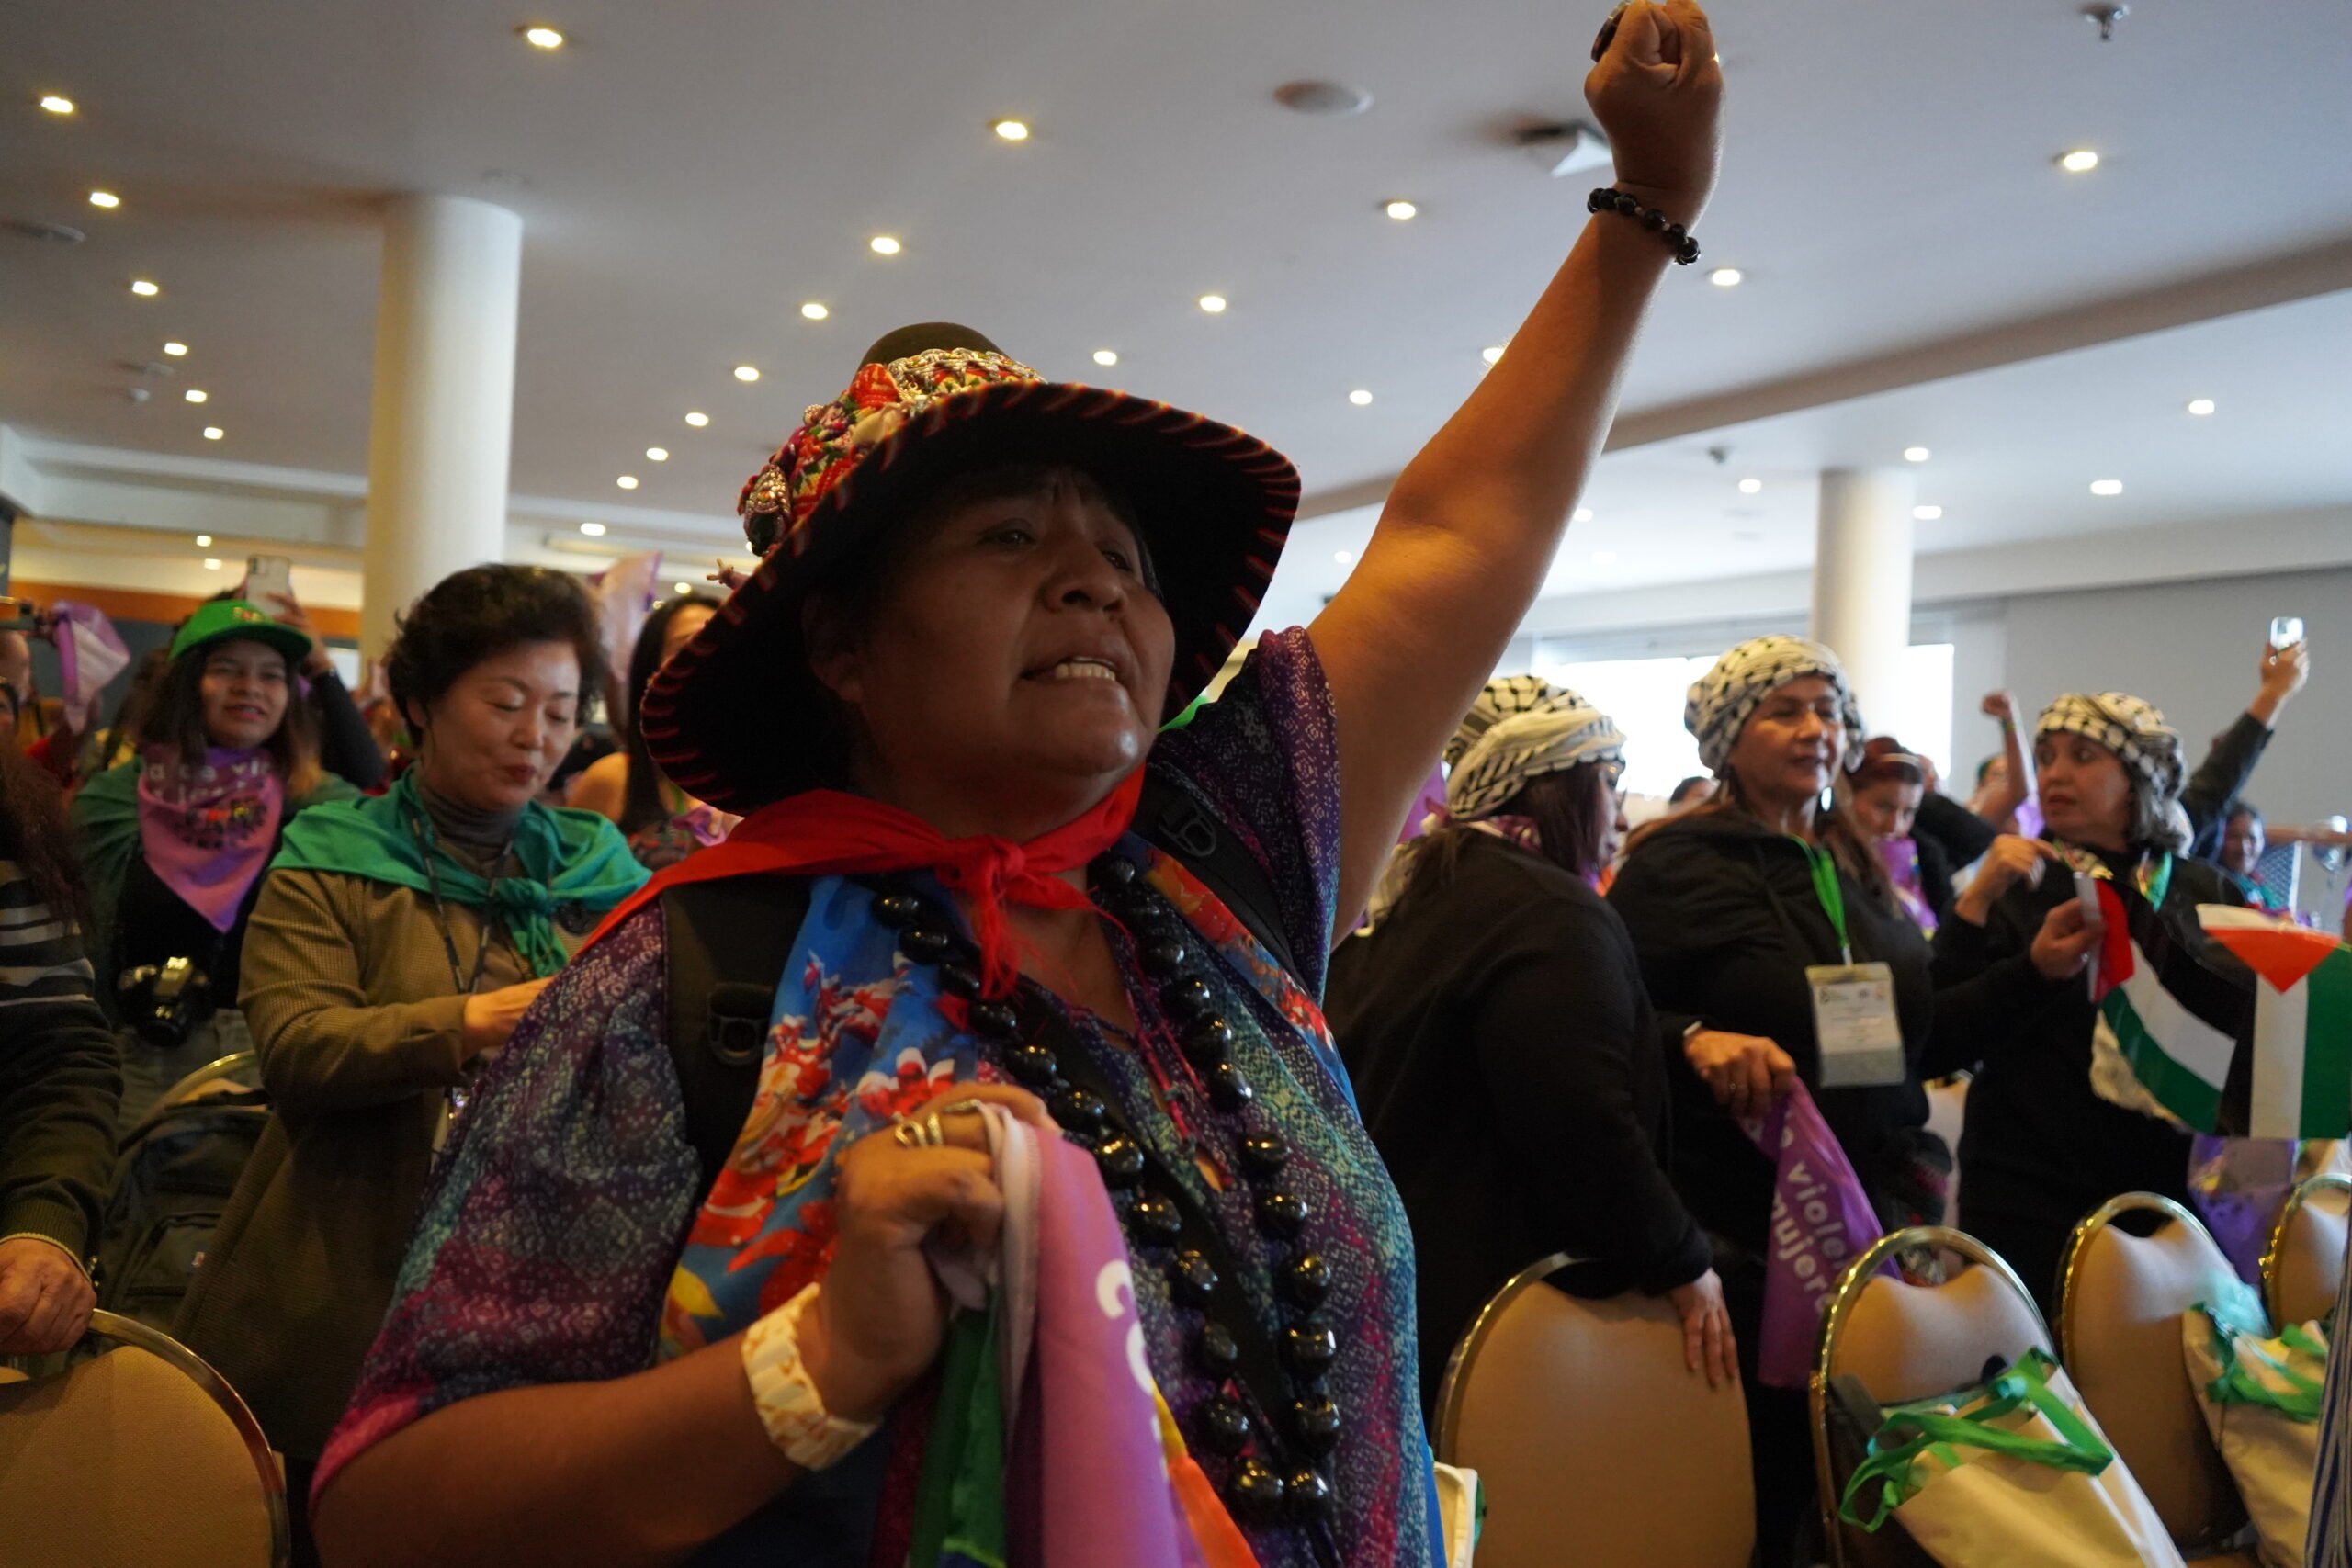 6th Women’s Assembly of La Via Campesina: “We Bring Lifeblood To This Movement”